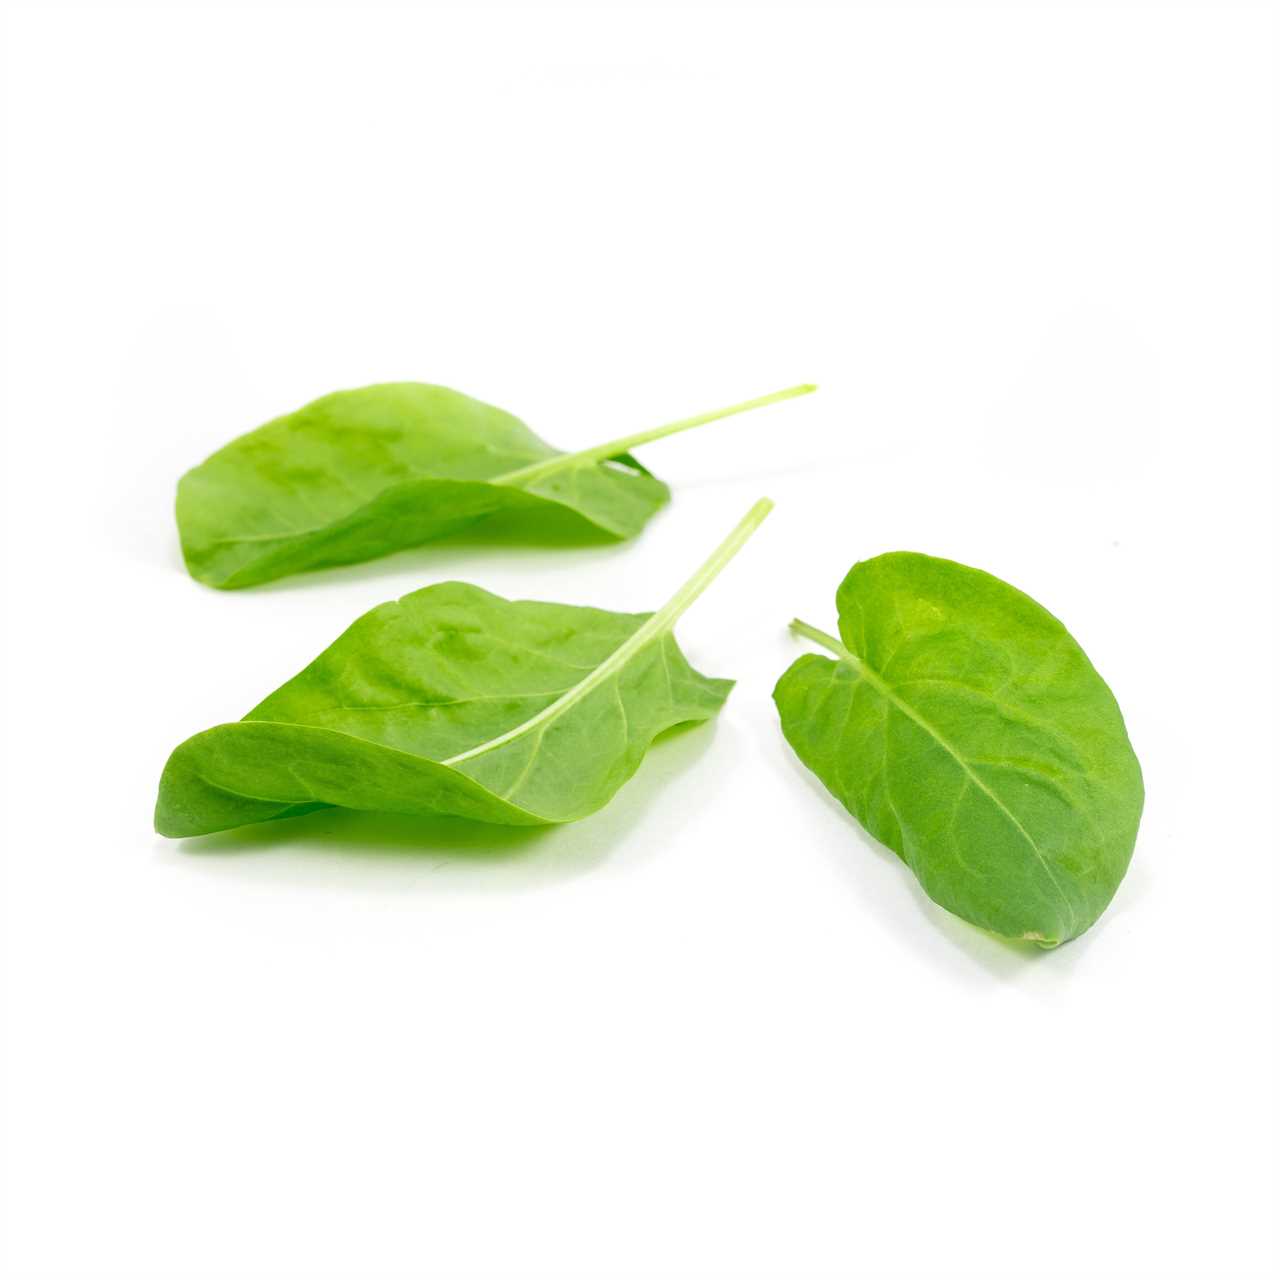 Sorrel The Tangy Green for Savory Creations